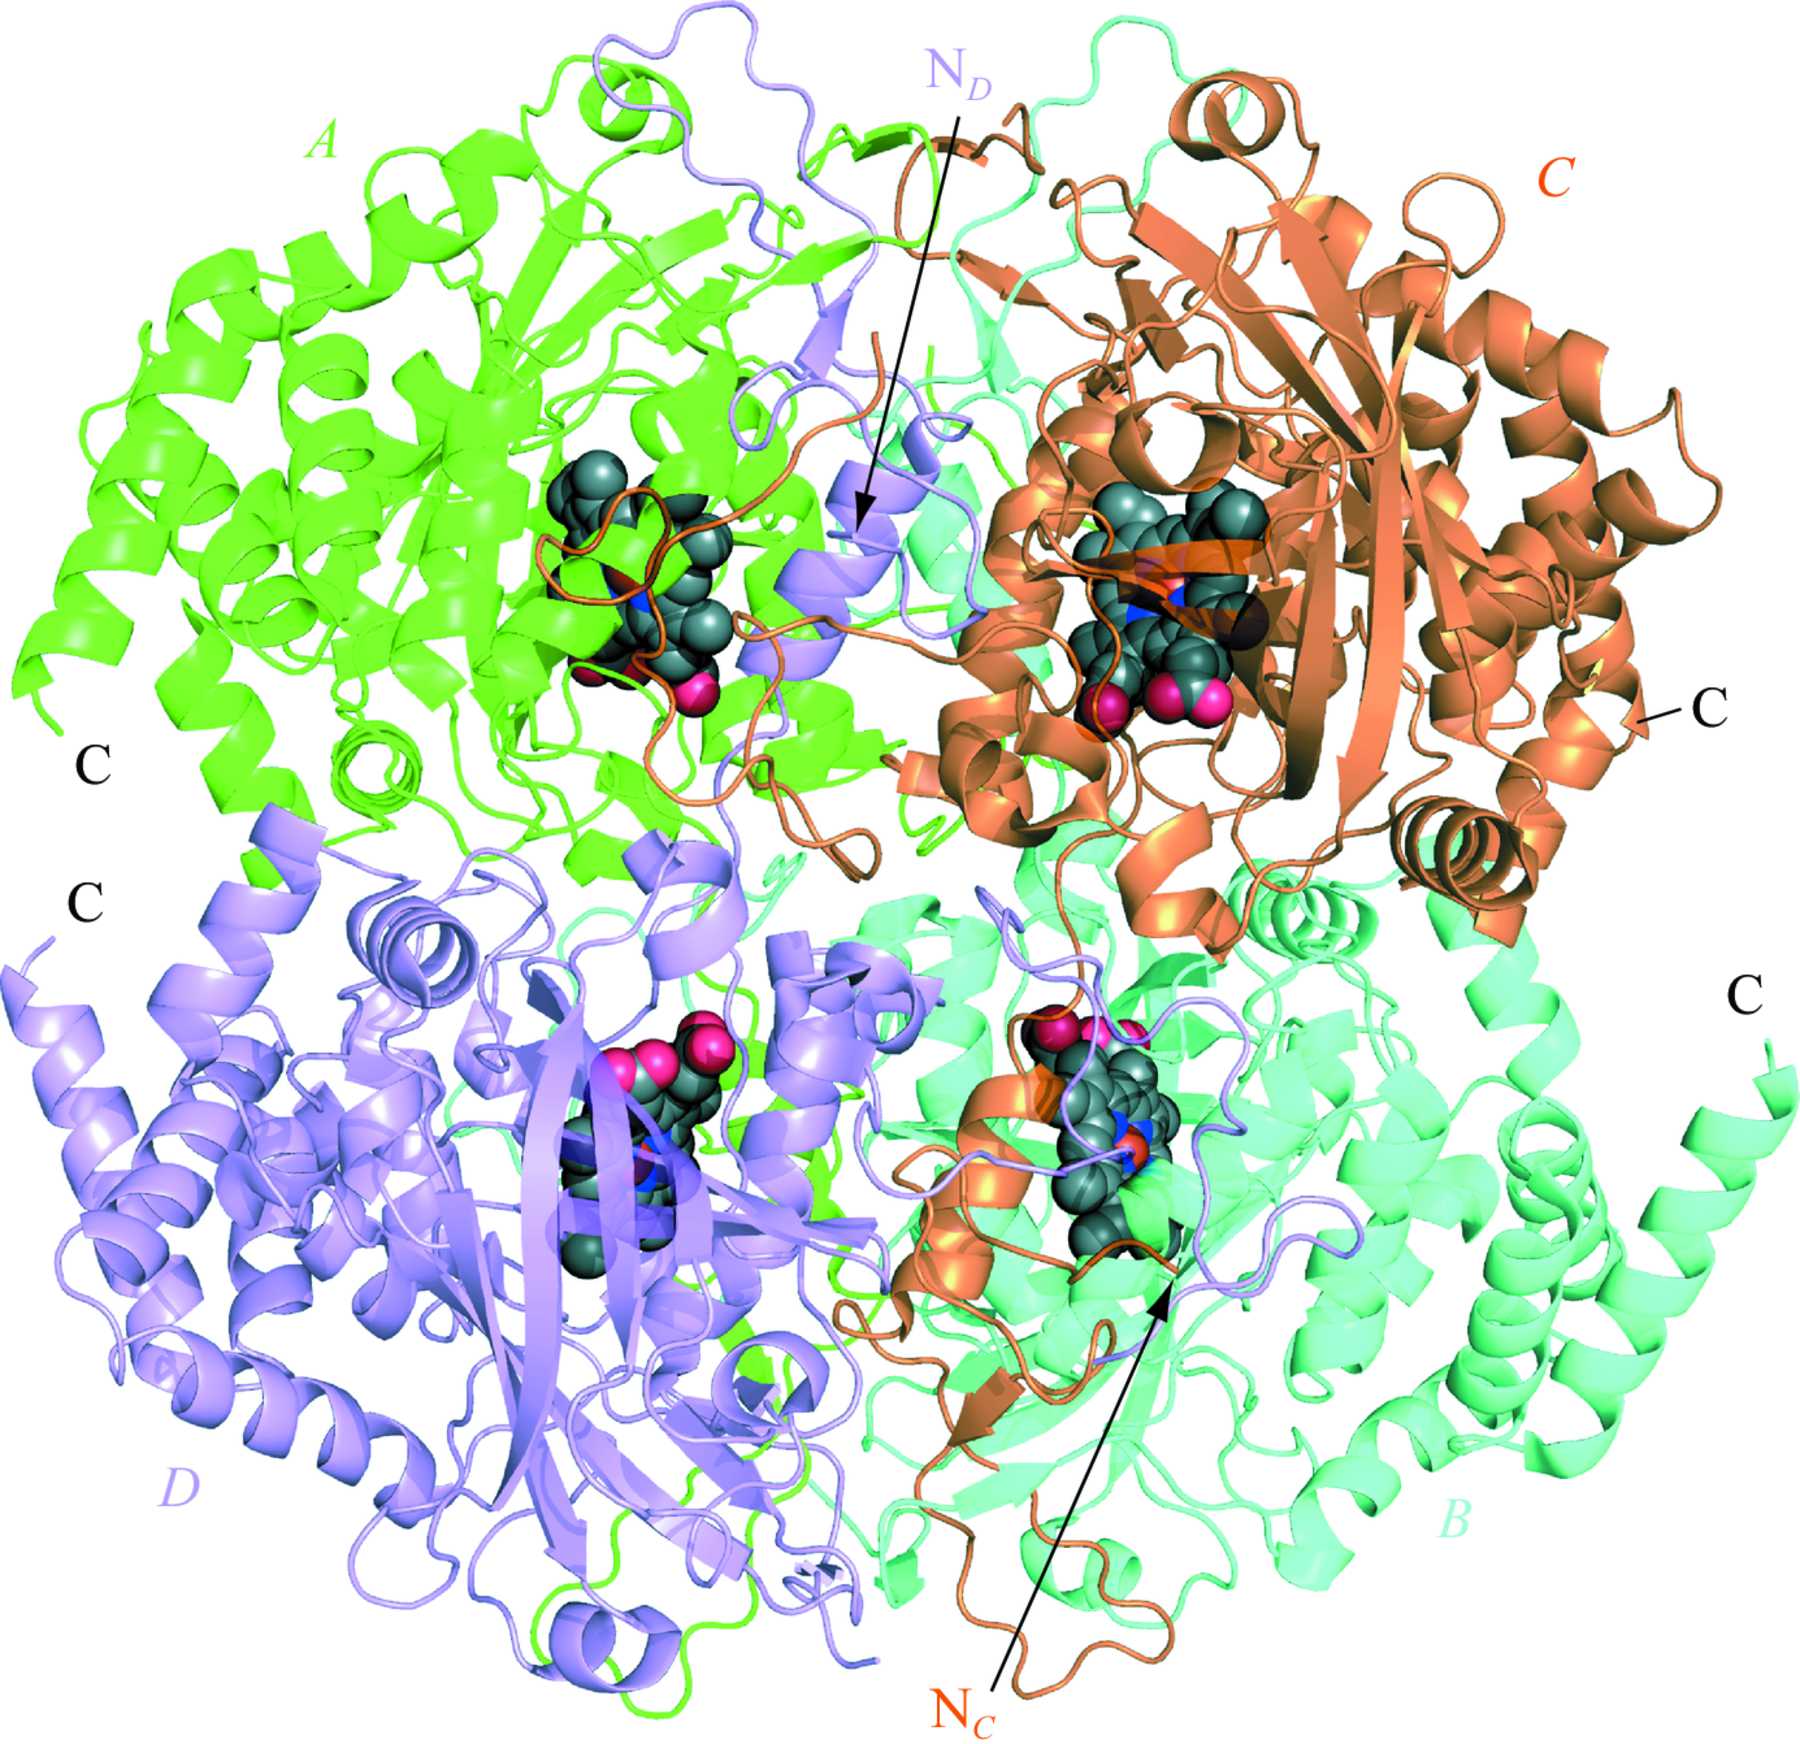  IUCr Structural features of peroxisomal catalase  from 